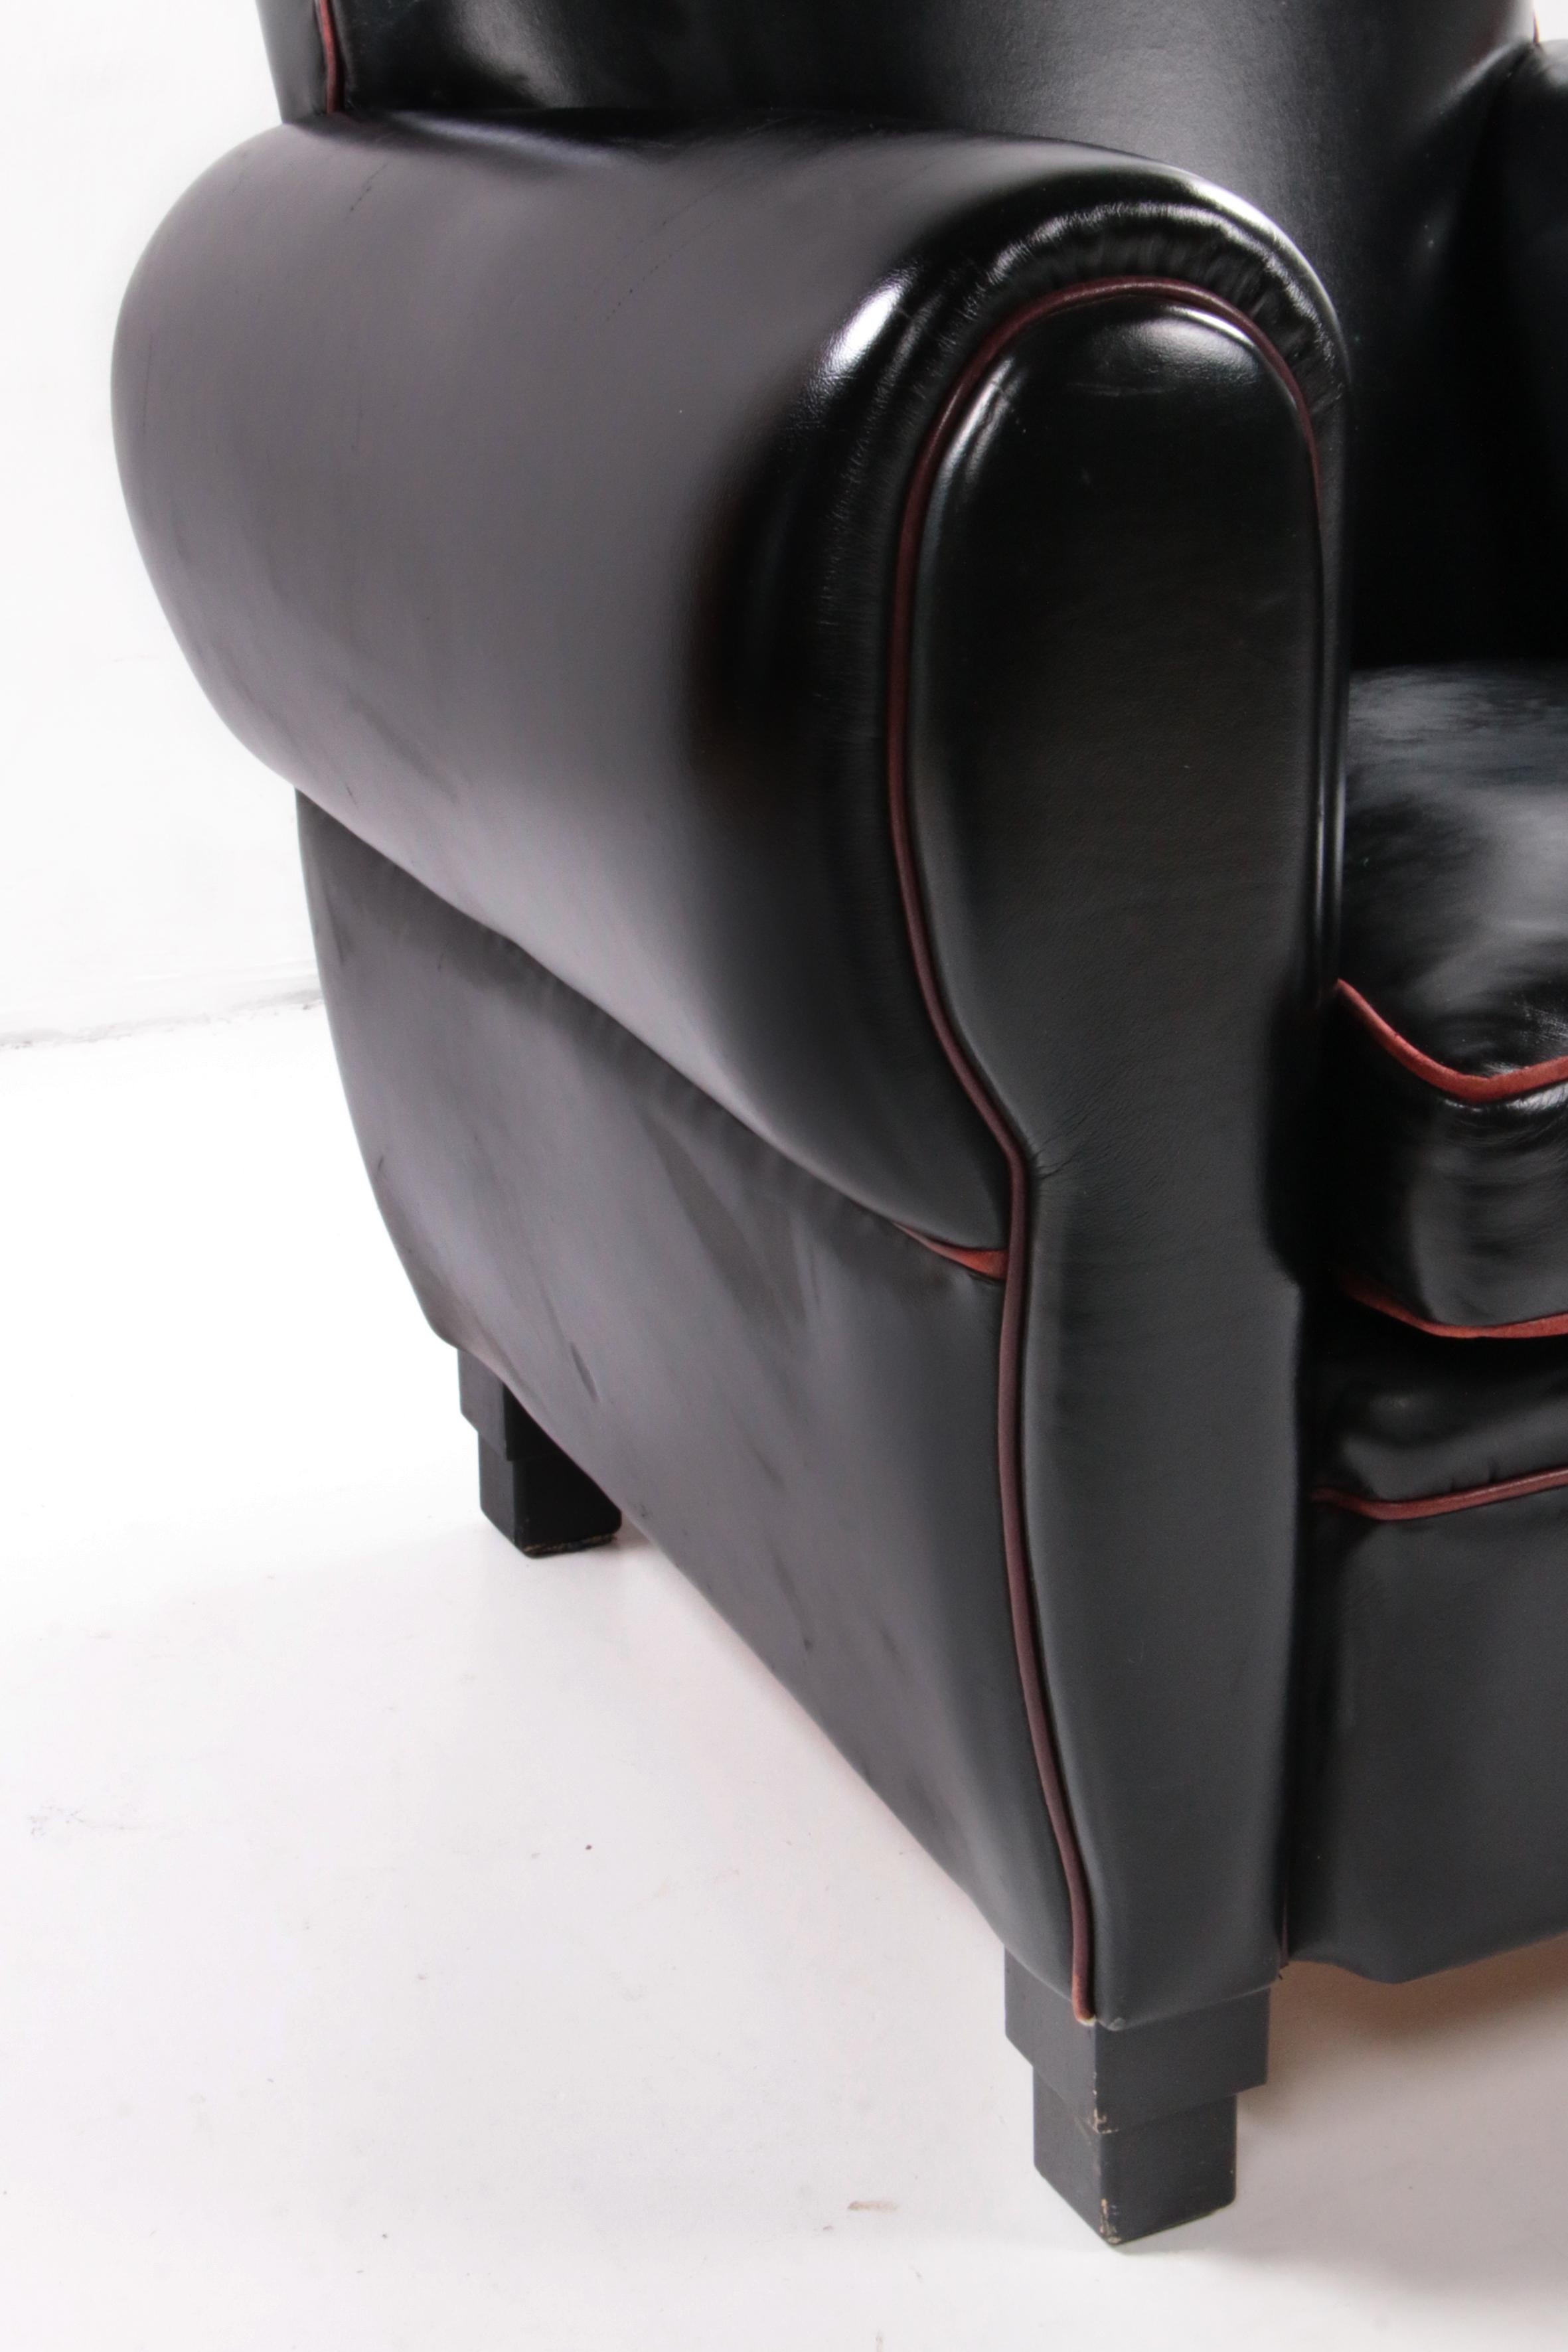 Very Comfortable and Beautiful Leather Armchair from LA Lounge Atelier For Sale 6